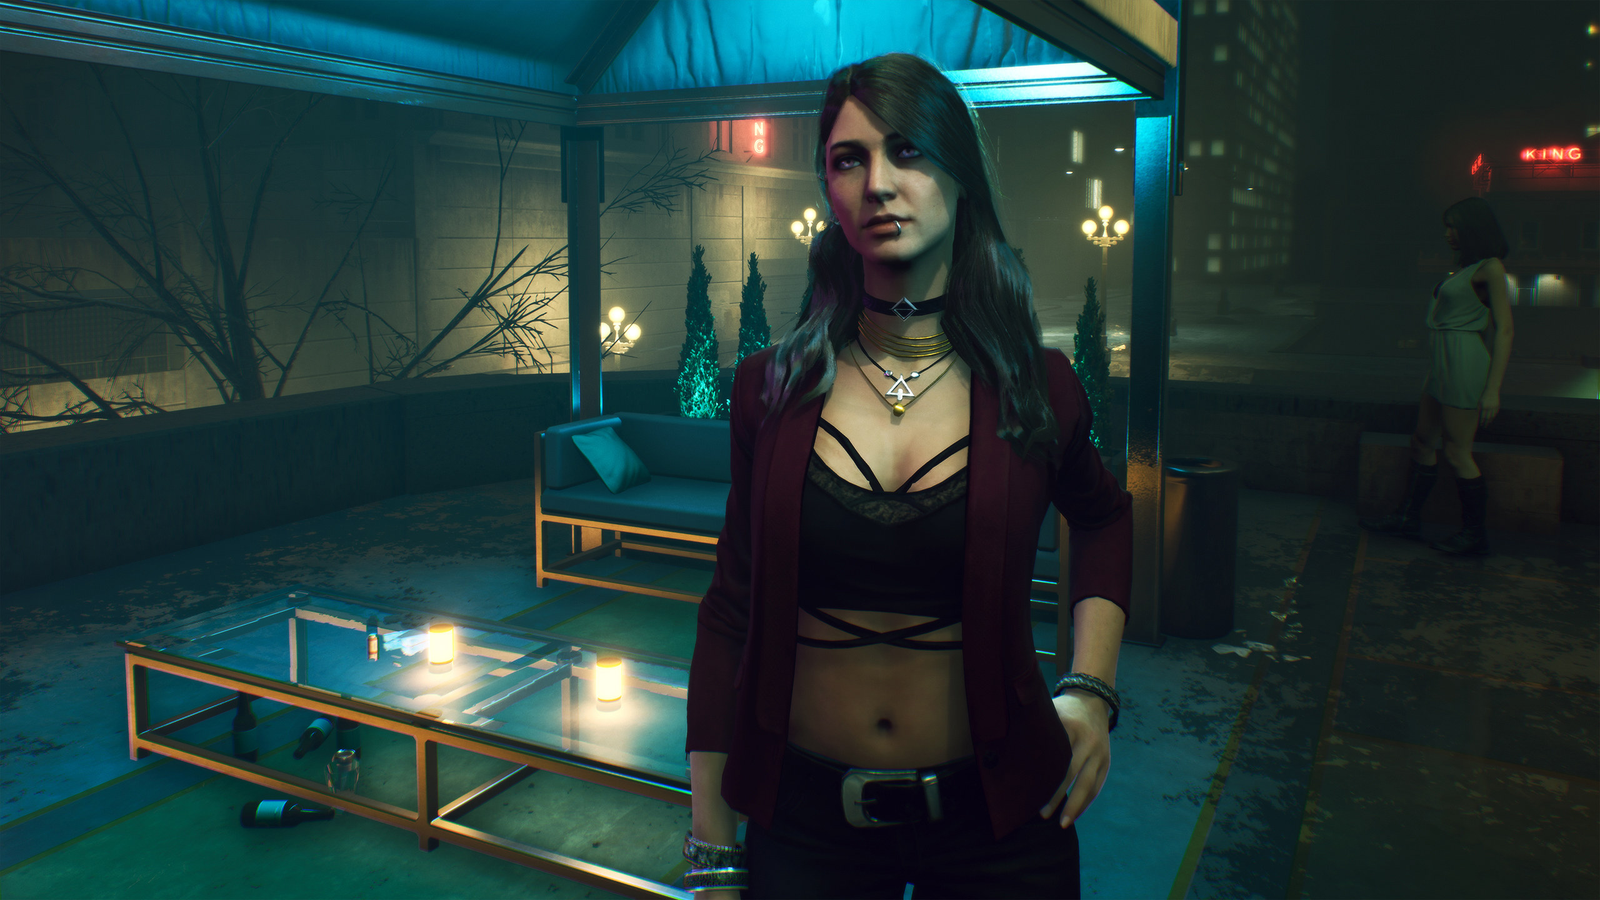 Vampire: The Masquerade – Bloodlines 2 has been delayed into 2021